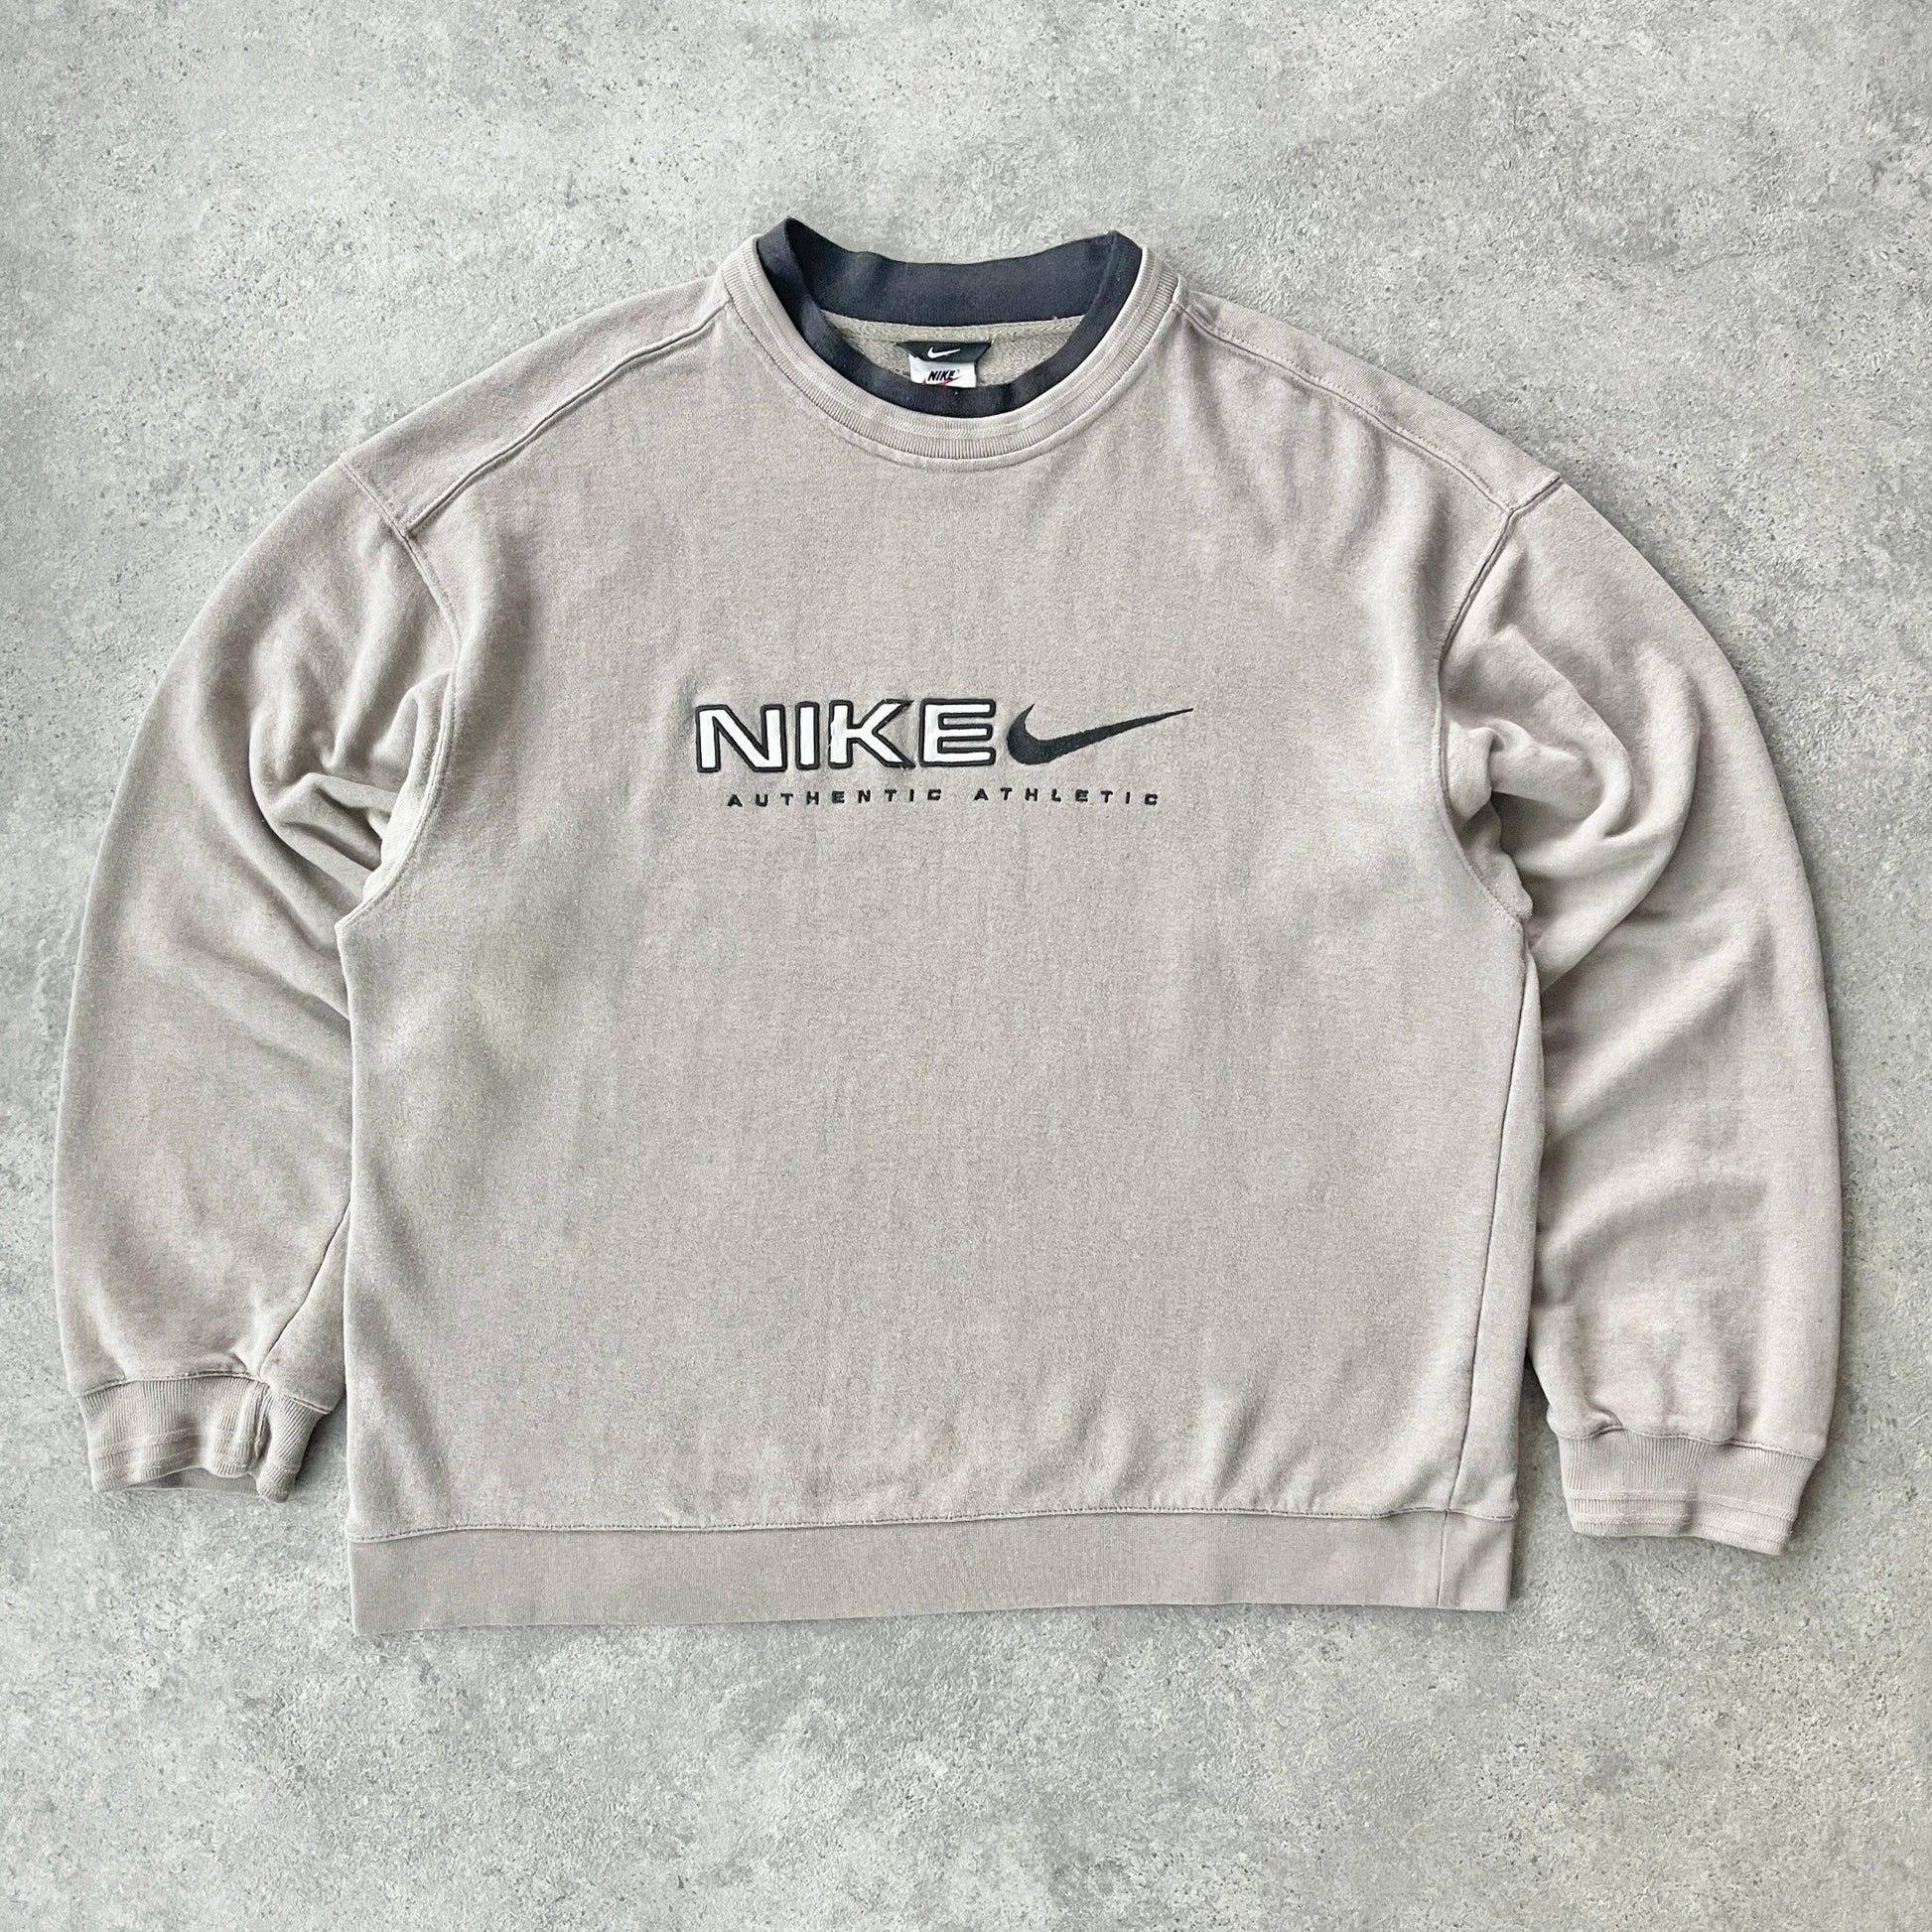 Nike RARE 1990s heavyweight embroidered sweatshirt (L) - Known Source